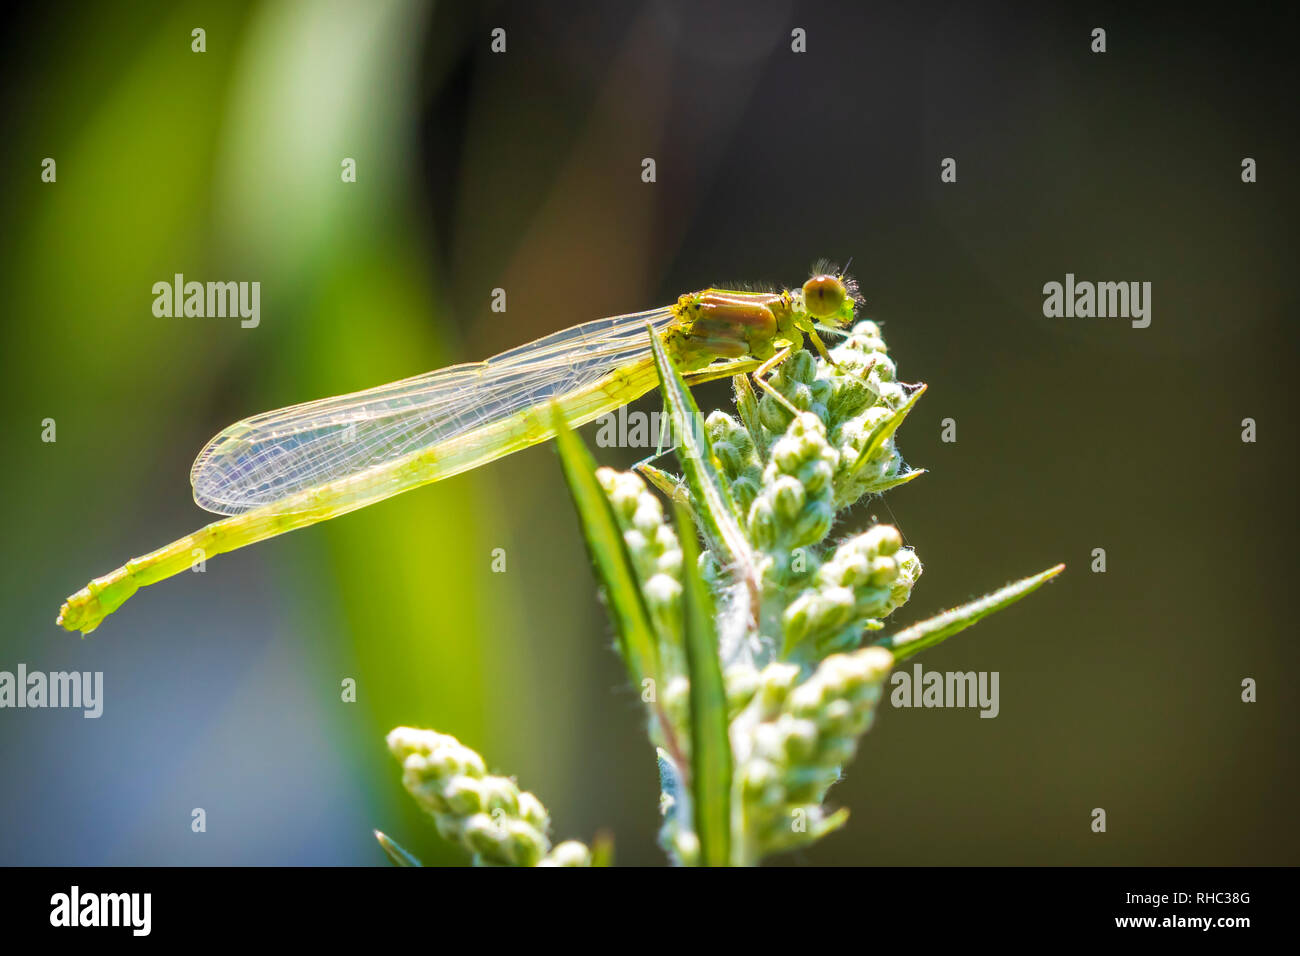 Closeup of a small red-eyed damselfly Erythromma viridulum just emerged from the nymph stage. A blue specie with red eyes. Stock Photo